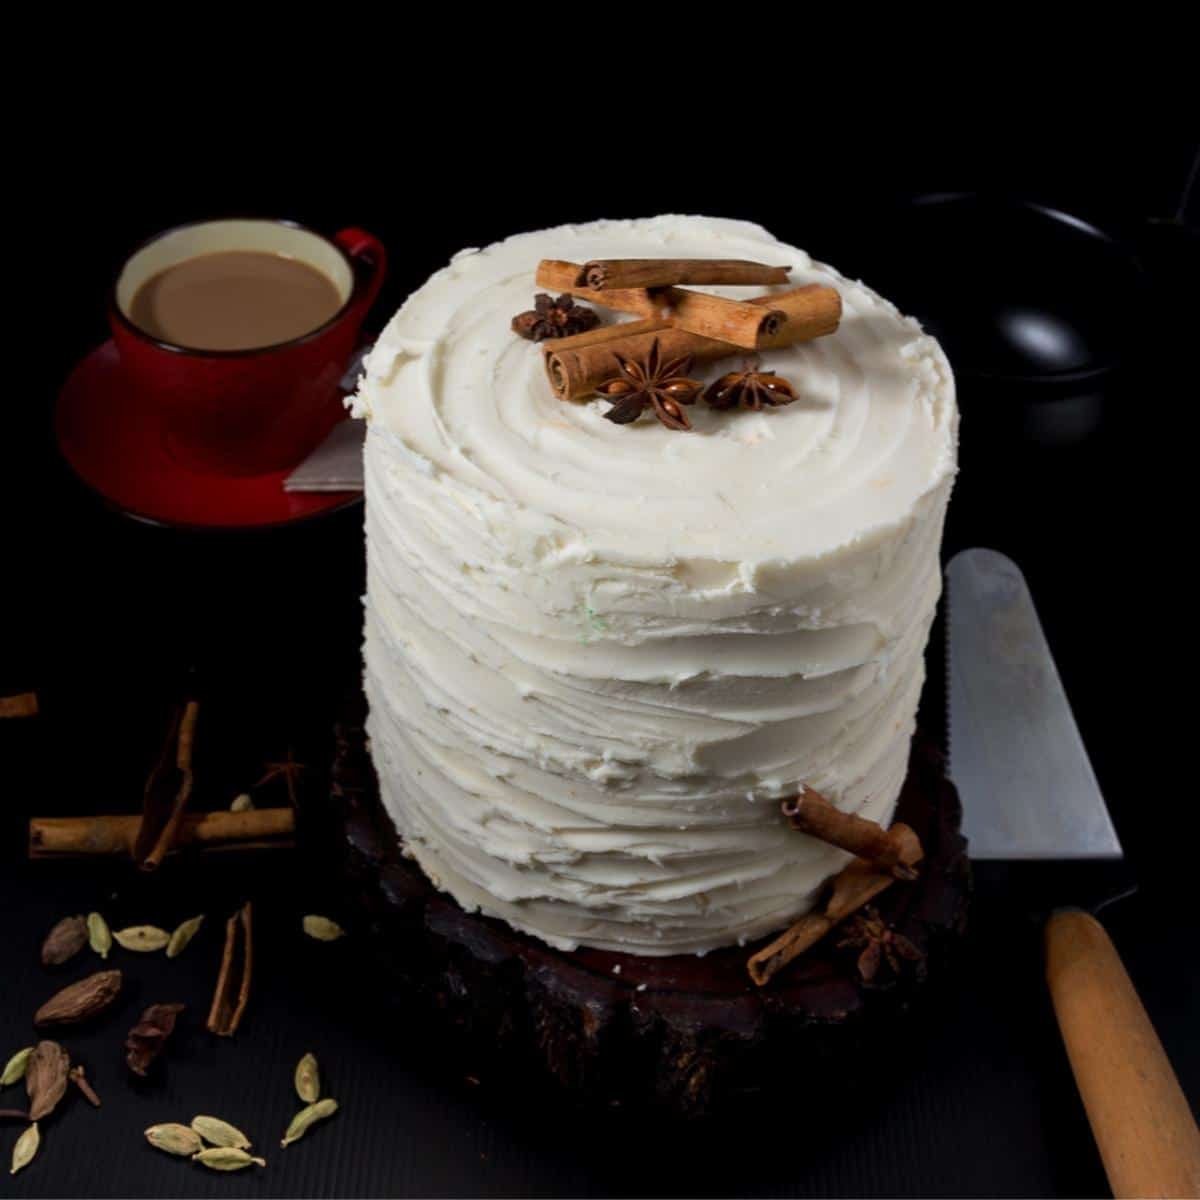 A layer cake with buttercream frosting and whole chai spices on top.